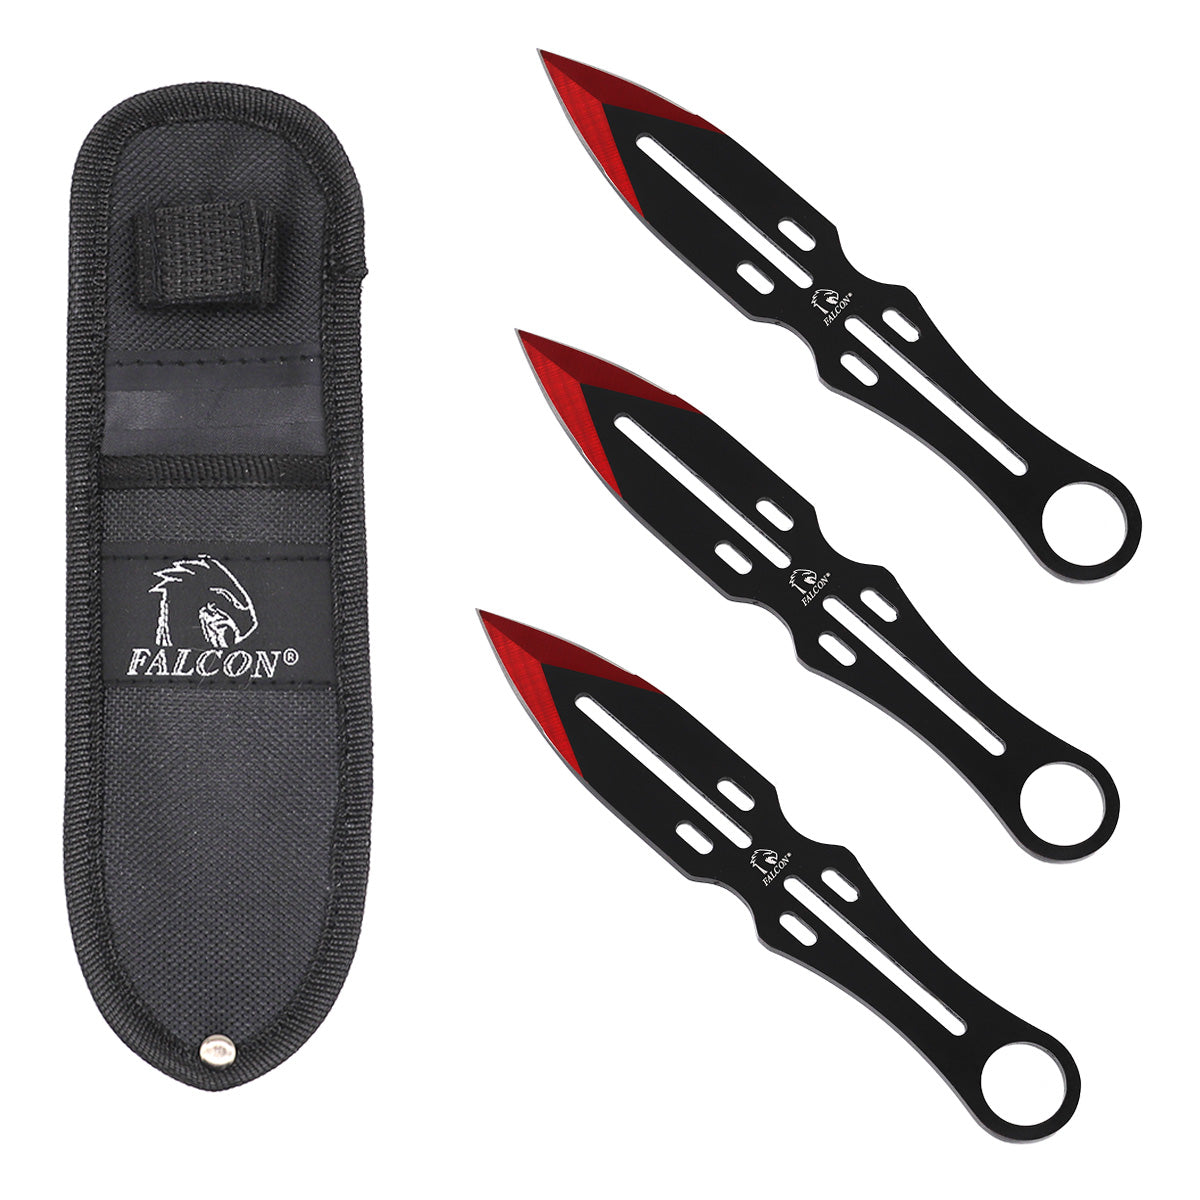 falcon-3-pcs-red-throwing-knife-set